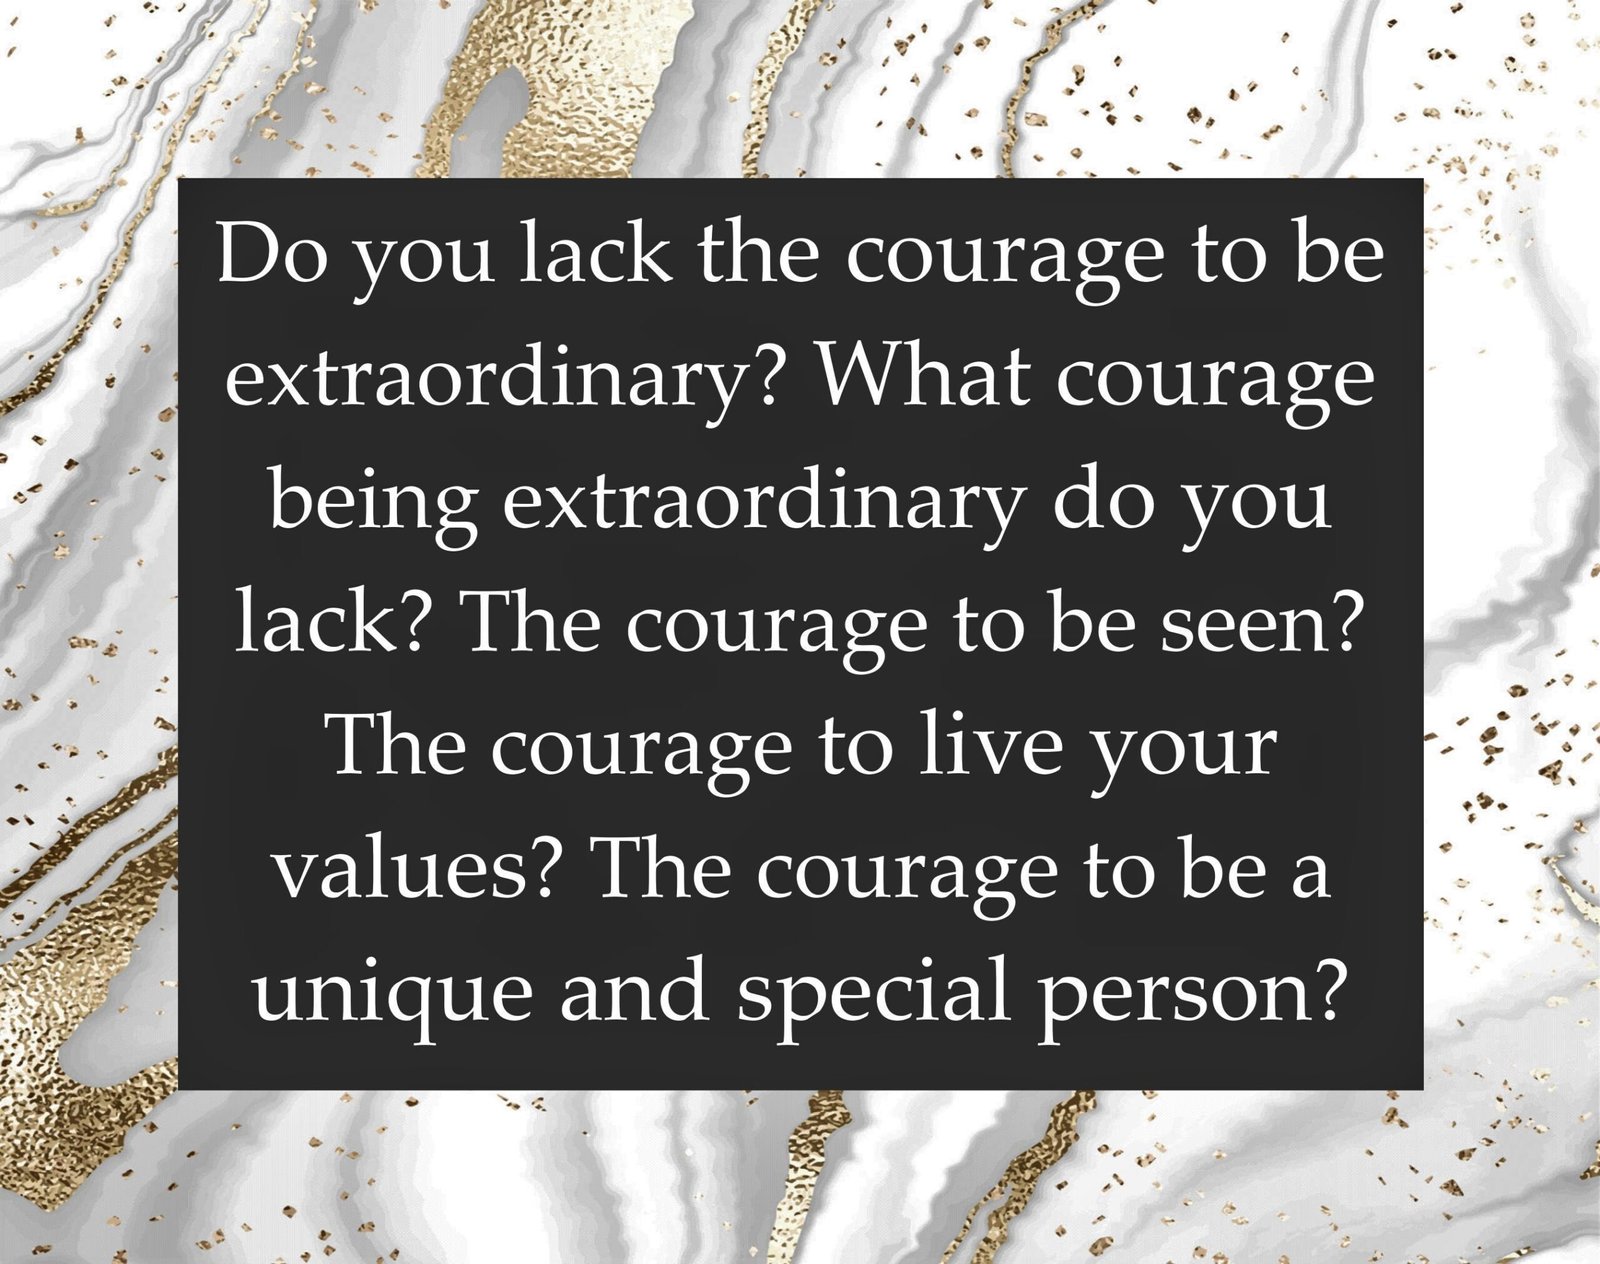 Do you lack the courage to be extraordinary